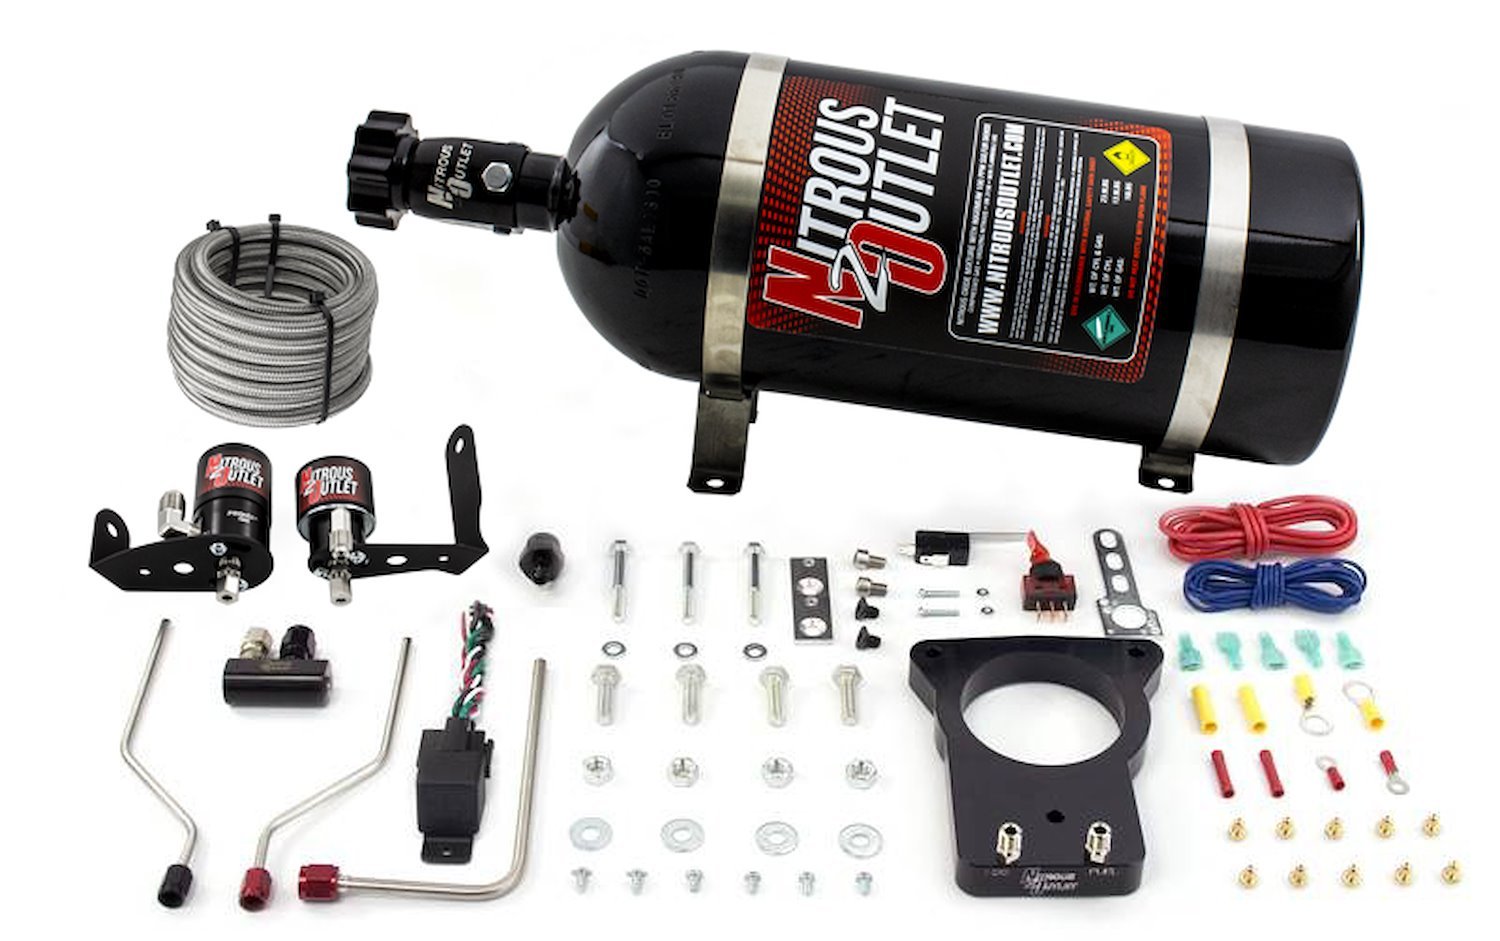 00-10126-78-15 Cadillac 78 mm 2004-2005 CTS-V Hard-Line Plate System, Gas/E85, 5-55psi, 50-200HP, 15lb bottle